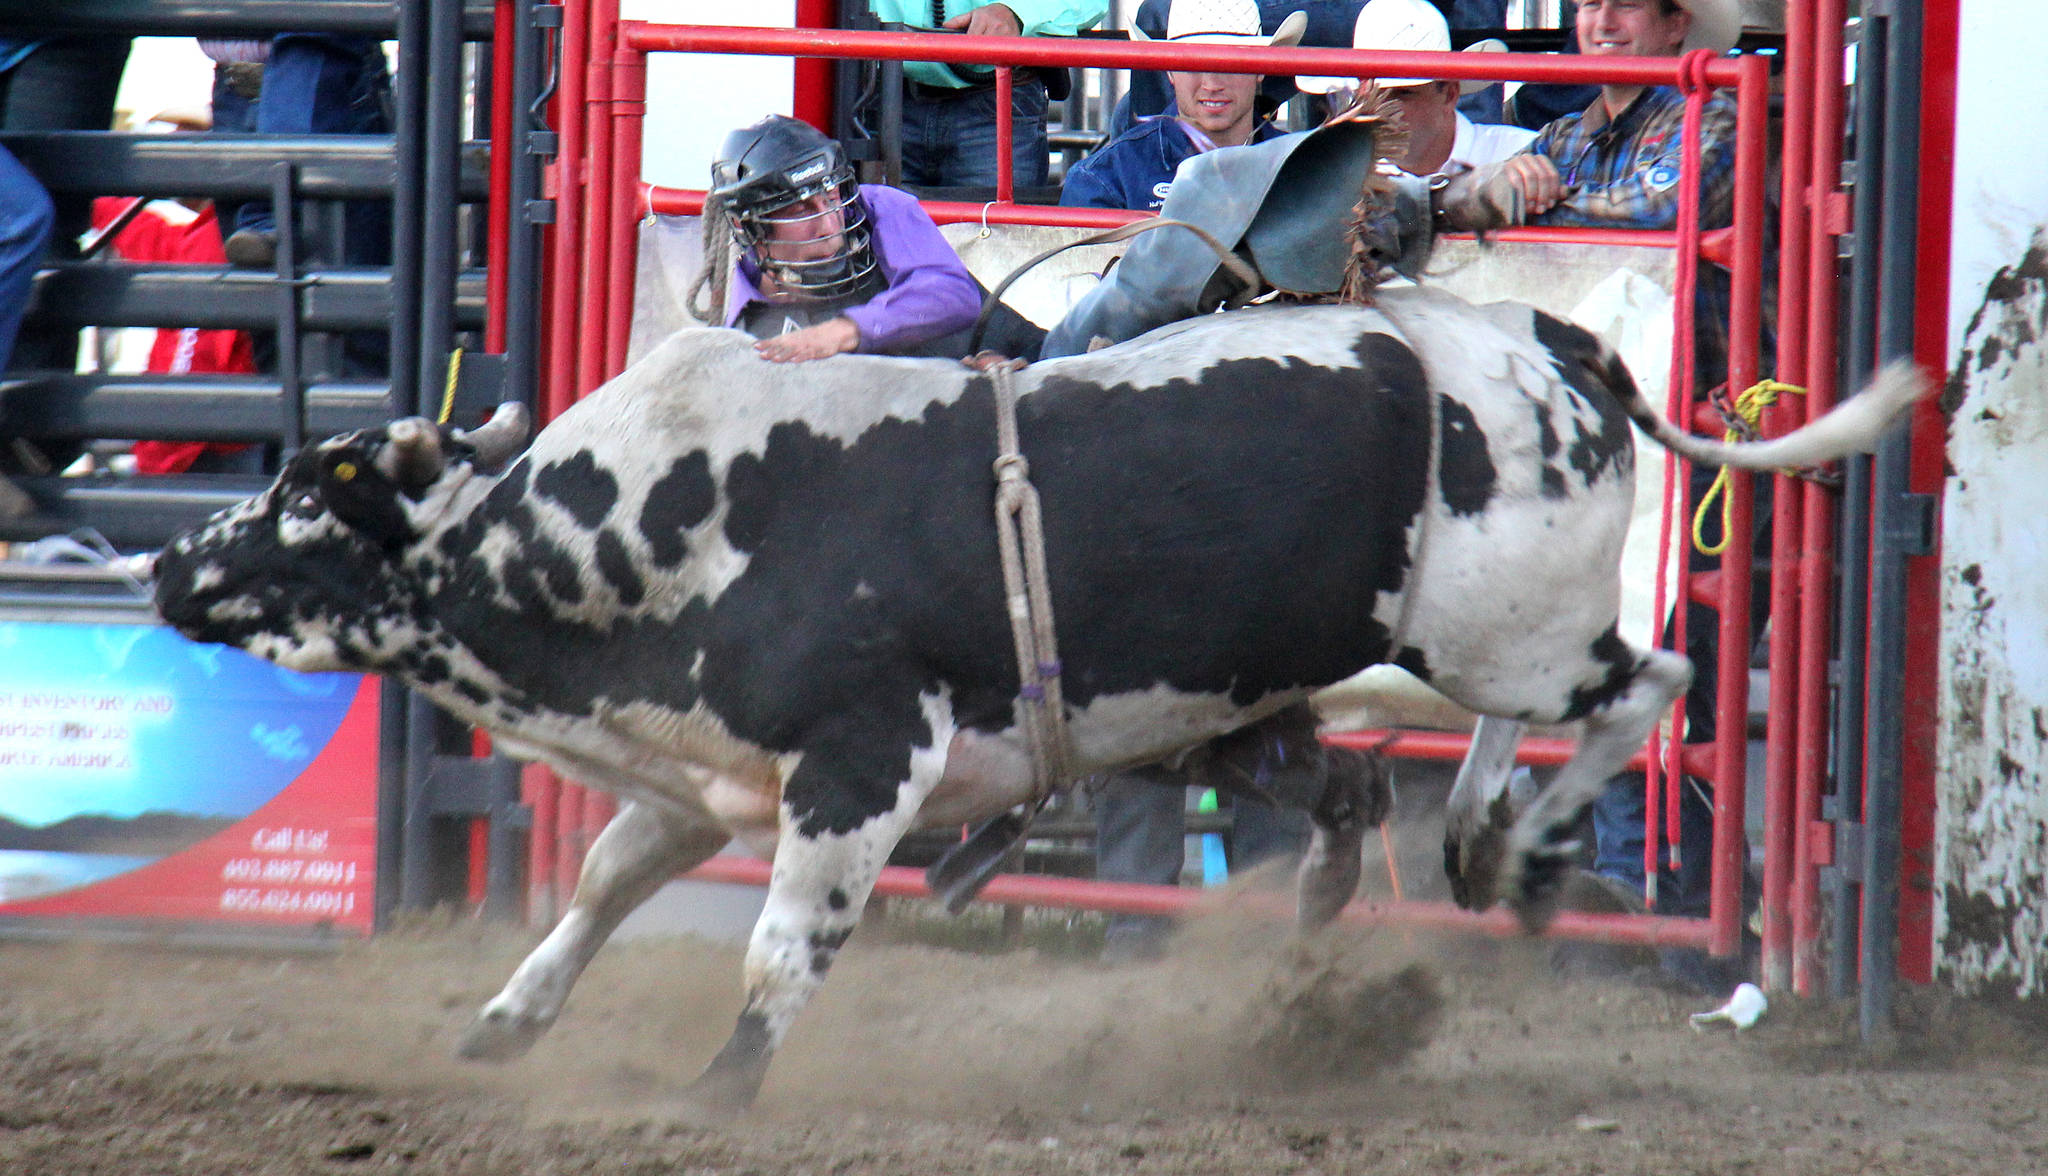 JB Moen loses his grip and slides off a bull during the Bull Riding event. None of the riders were able to stay on the bull for the full eight second, during Saturday’s performance.